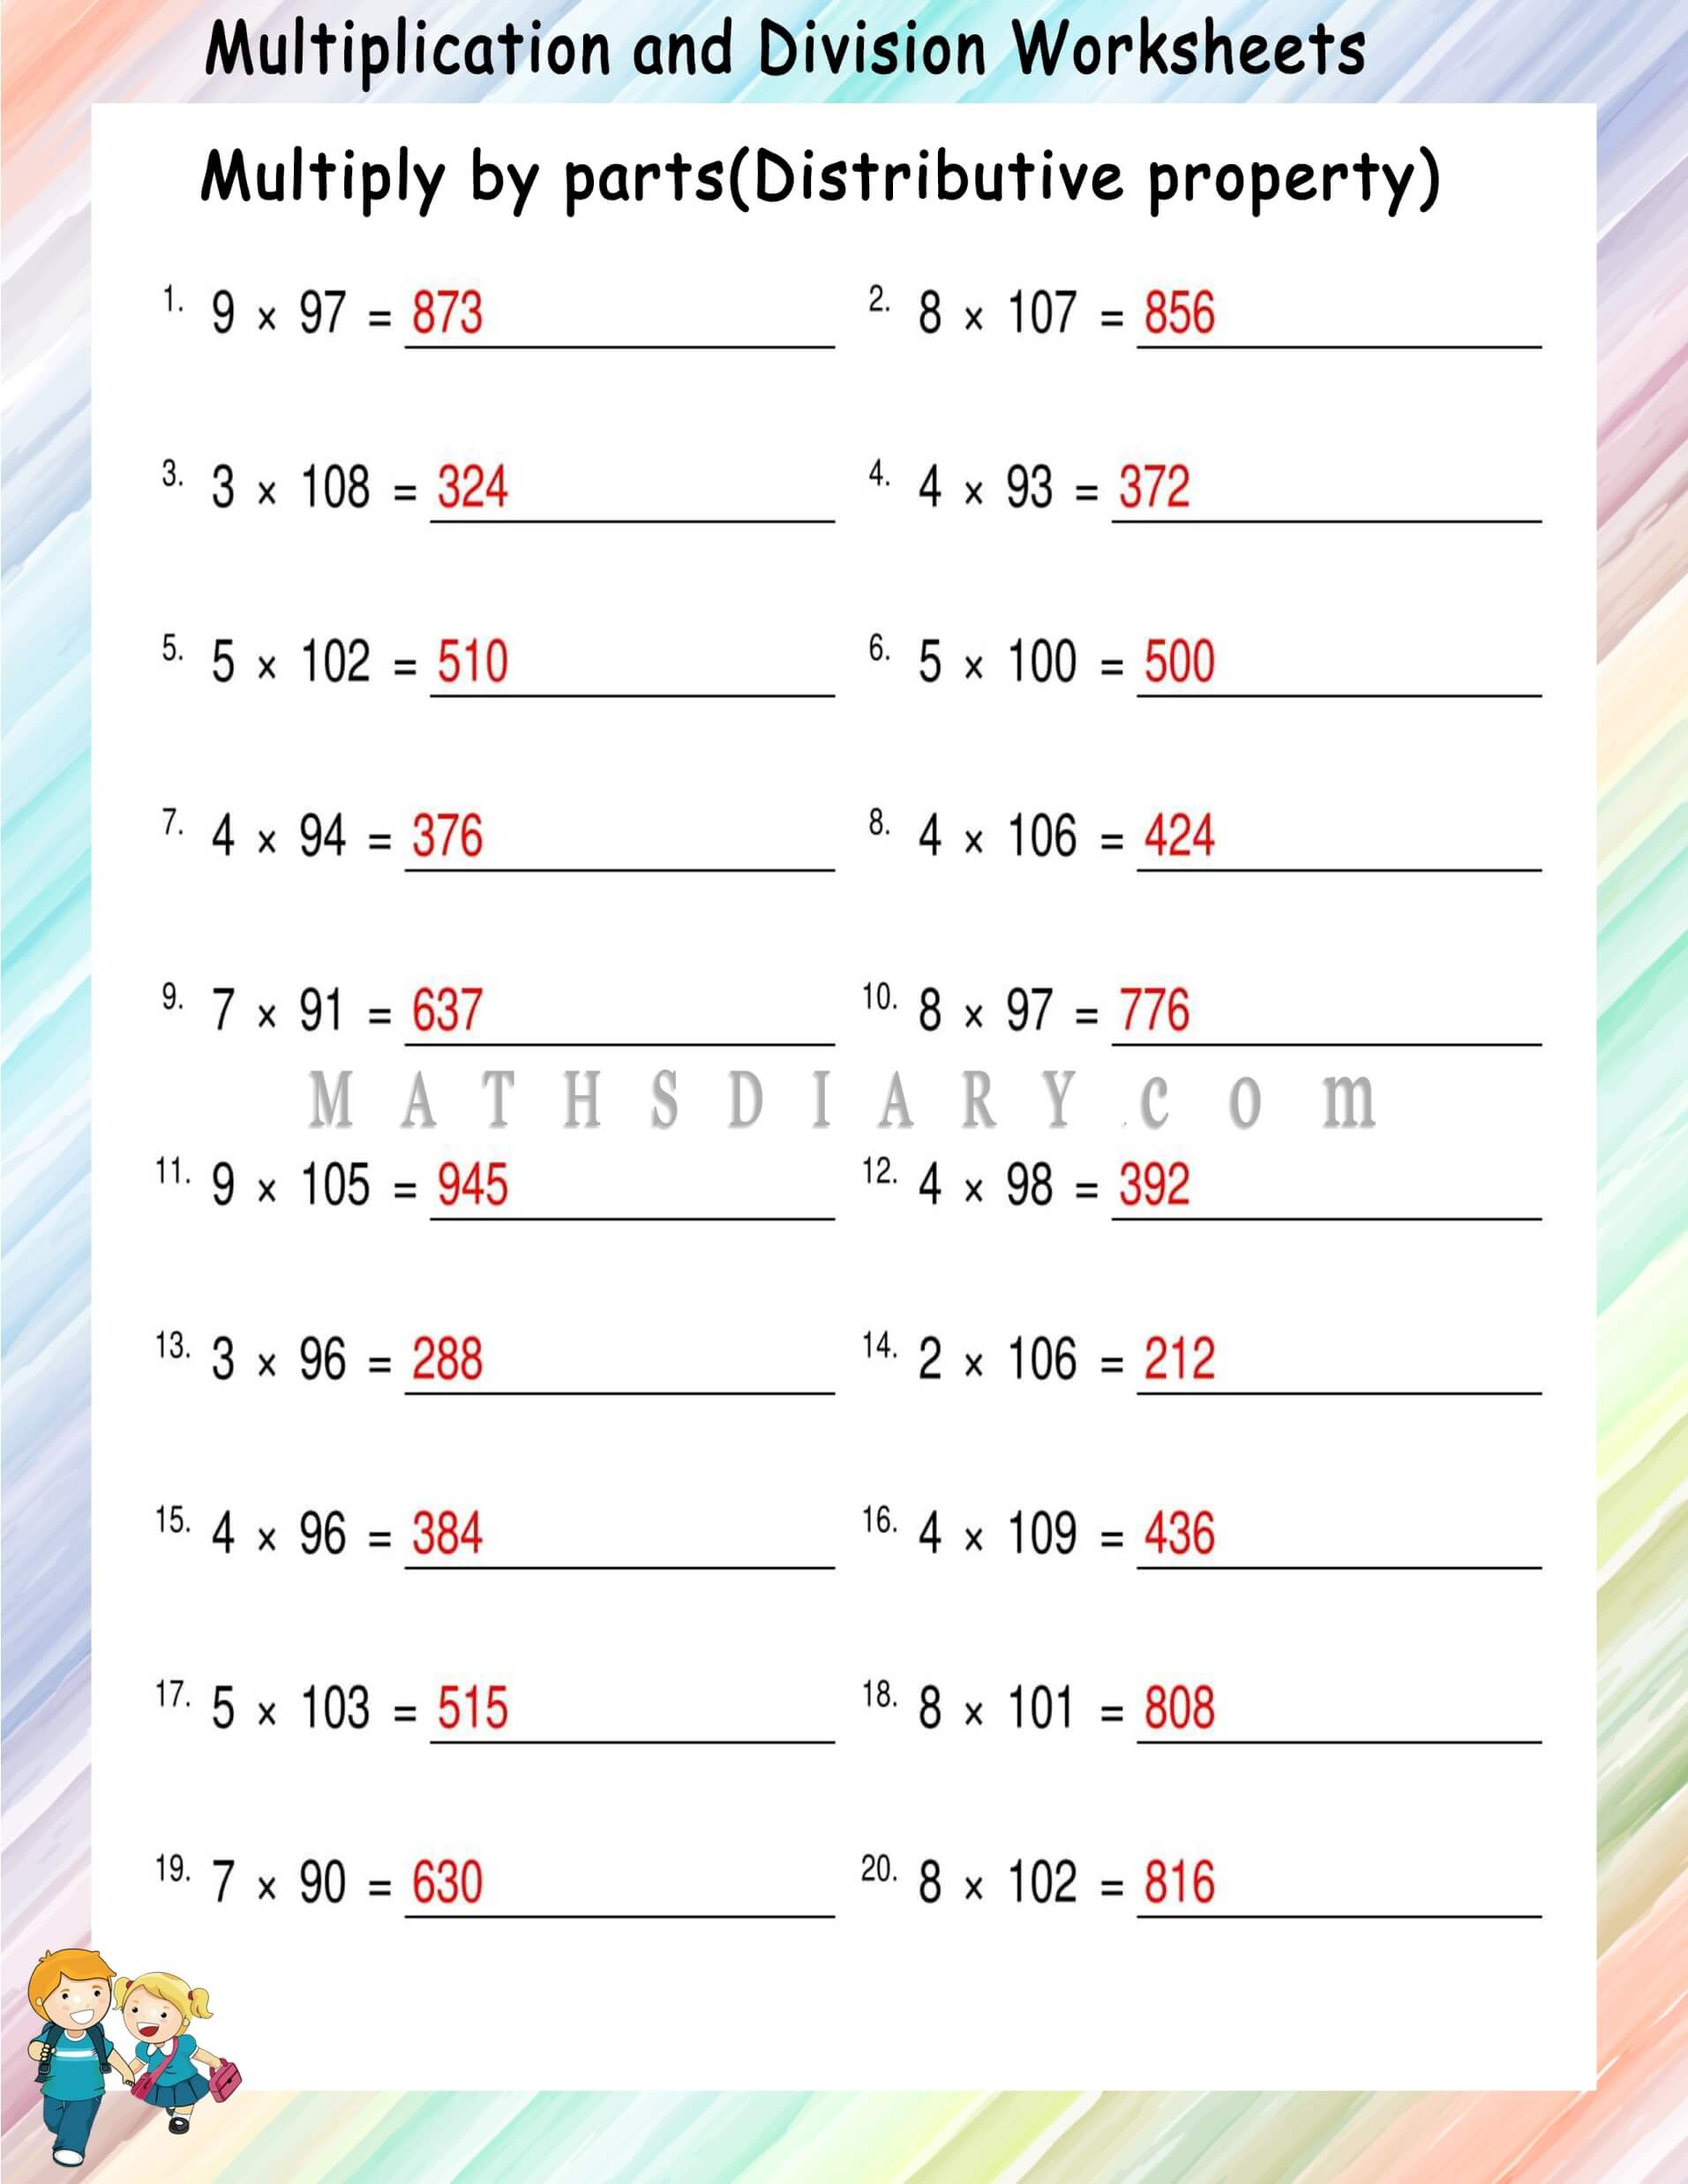 multiplication-and-division-math-worksheets-page-3